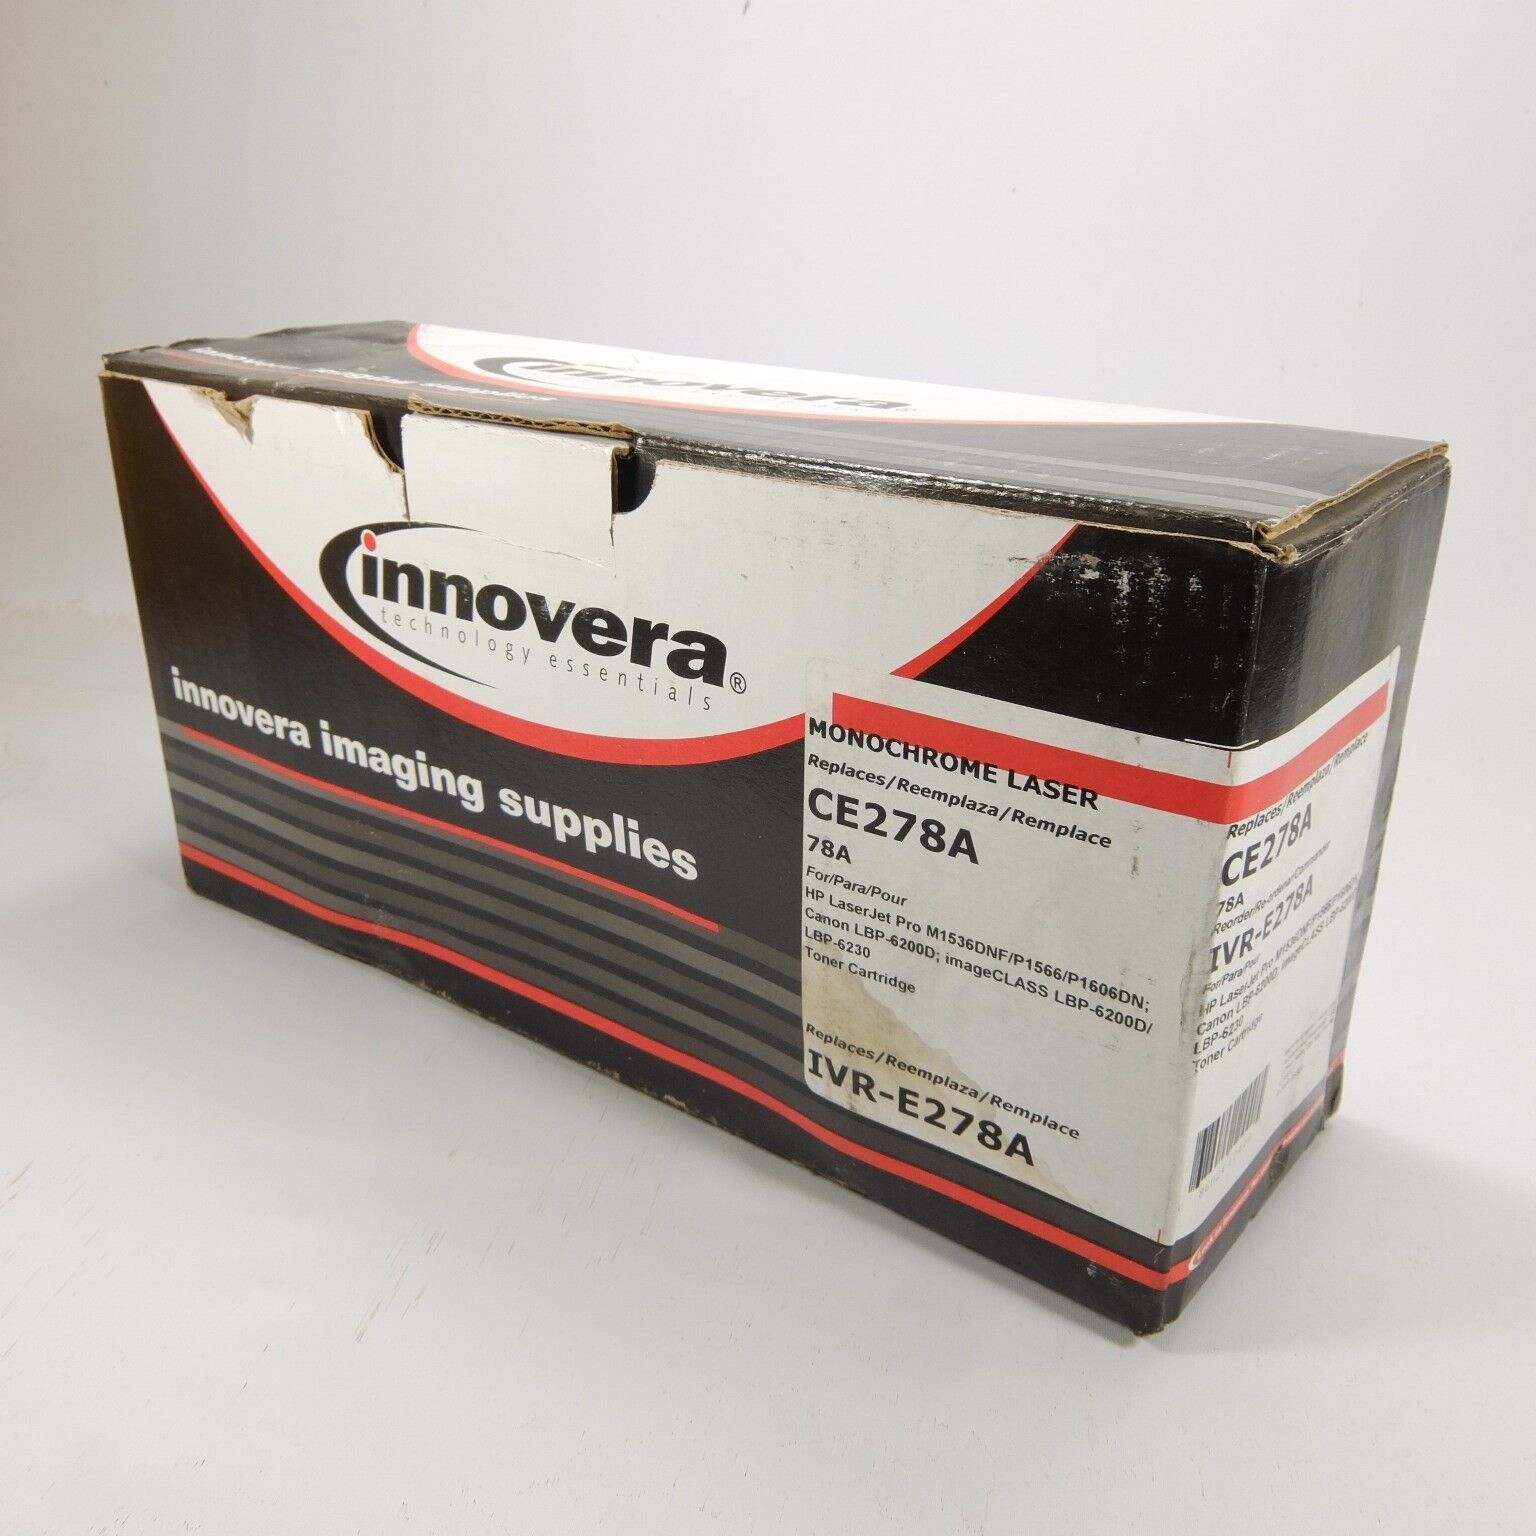 New - Innovera IVR-CE278A Remanufactured for HP 78A Black Toner Cartridge - $9.99